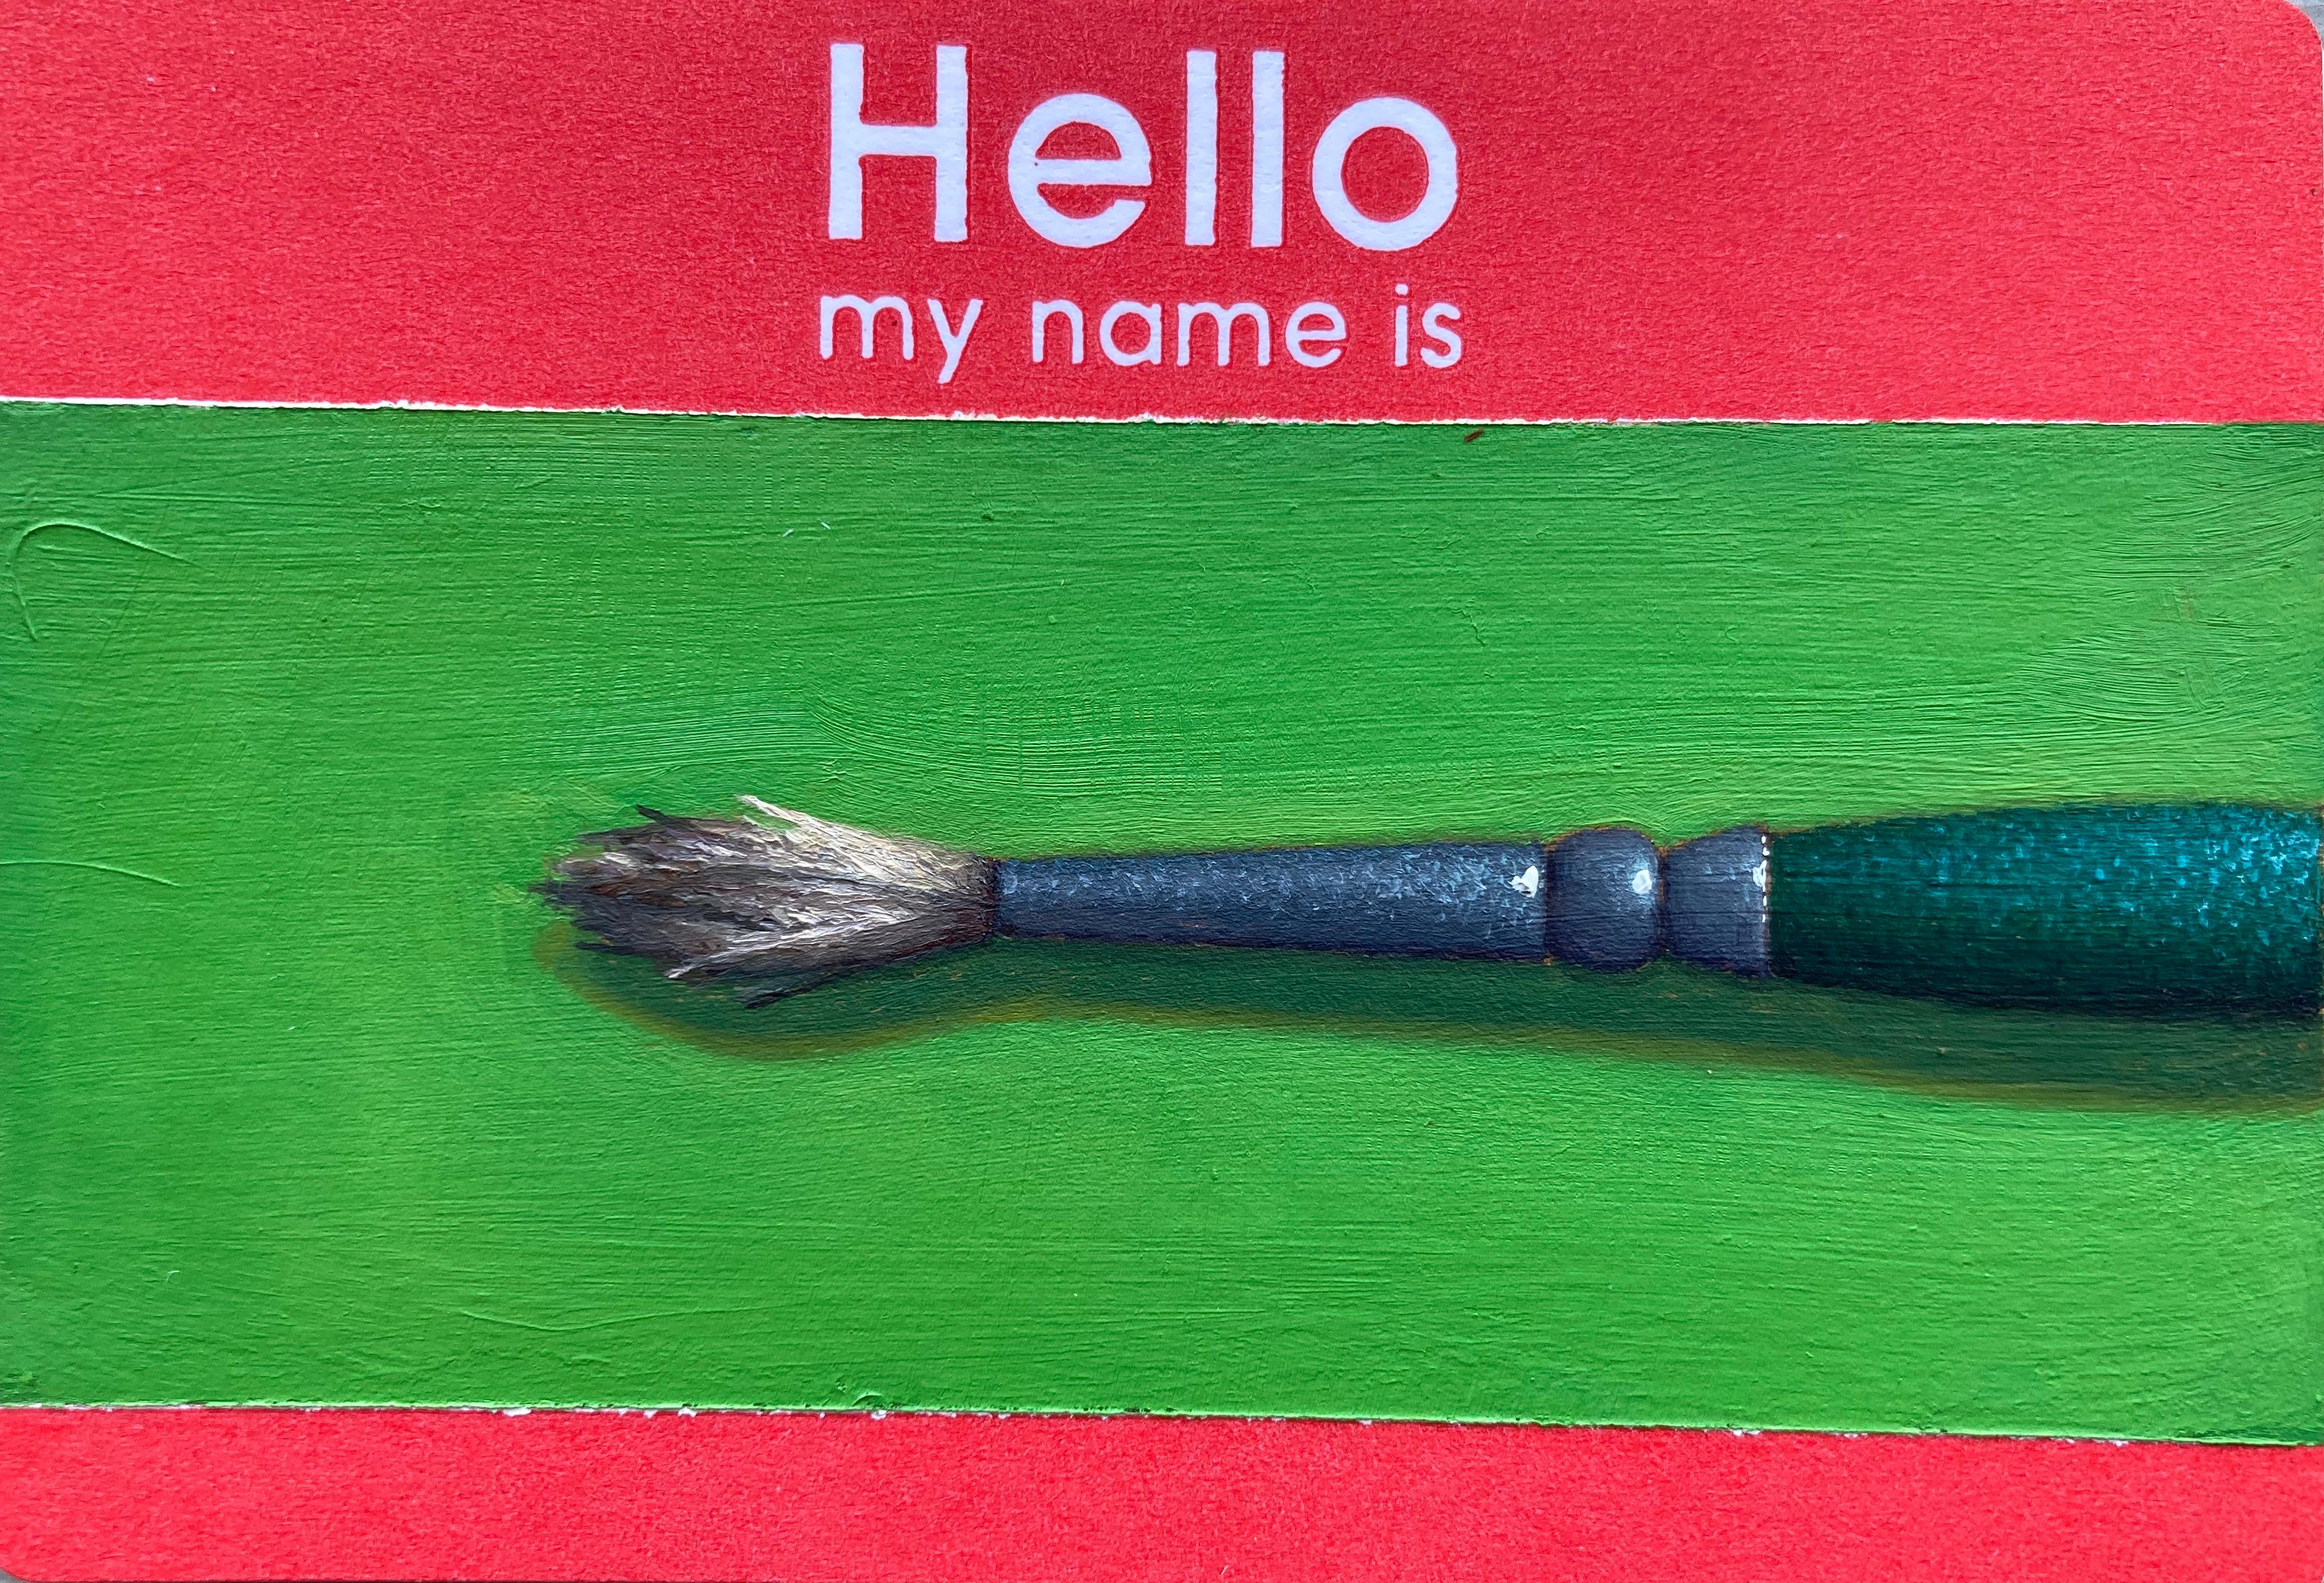 Hello, My Name Is: Paintbrush - miniature pictograph painting on paper - Mixed Media Art by Anthony Mastromatteo